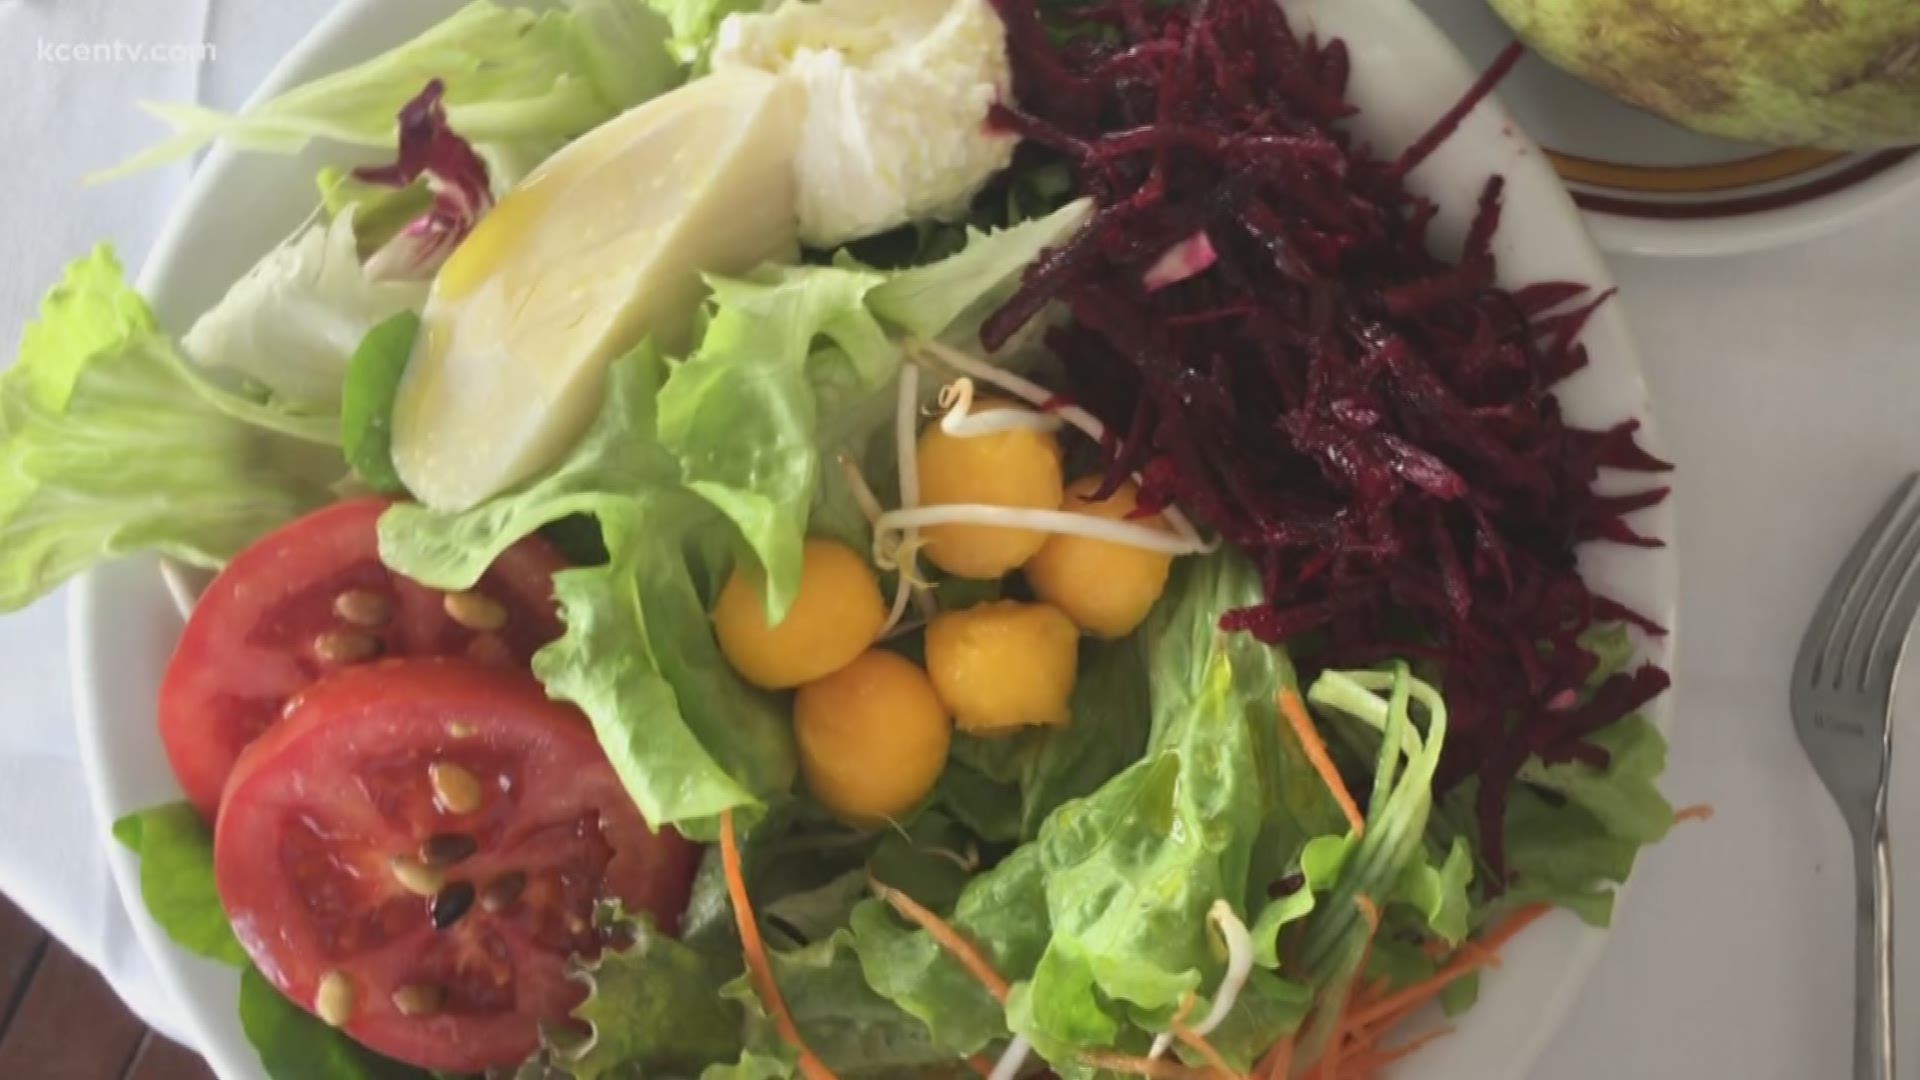 Leslie celebrates National Garden Month by learning how to make salads that are satisfying and fun with a certified personal trainer with a focus on fitness nutrition